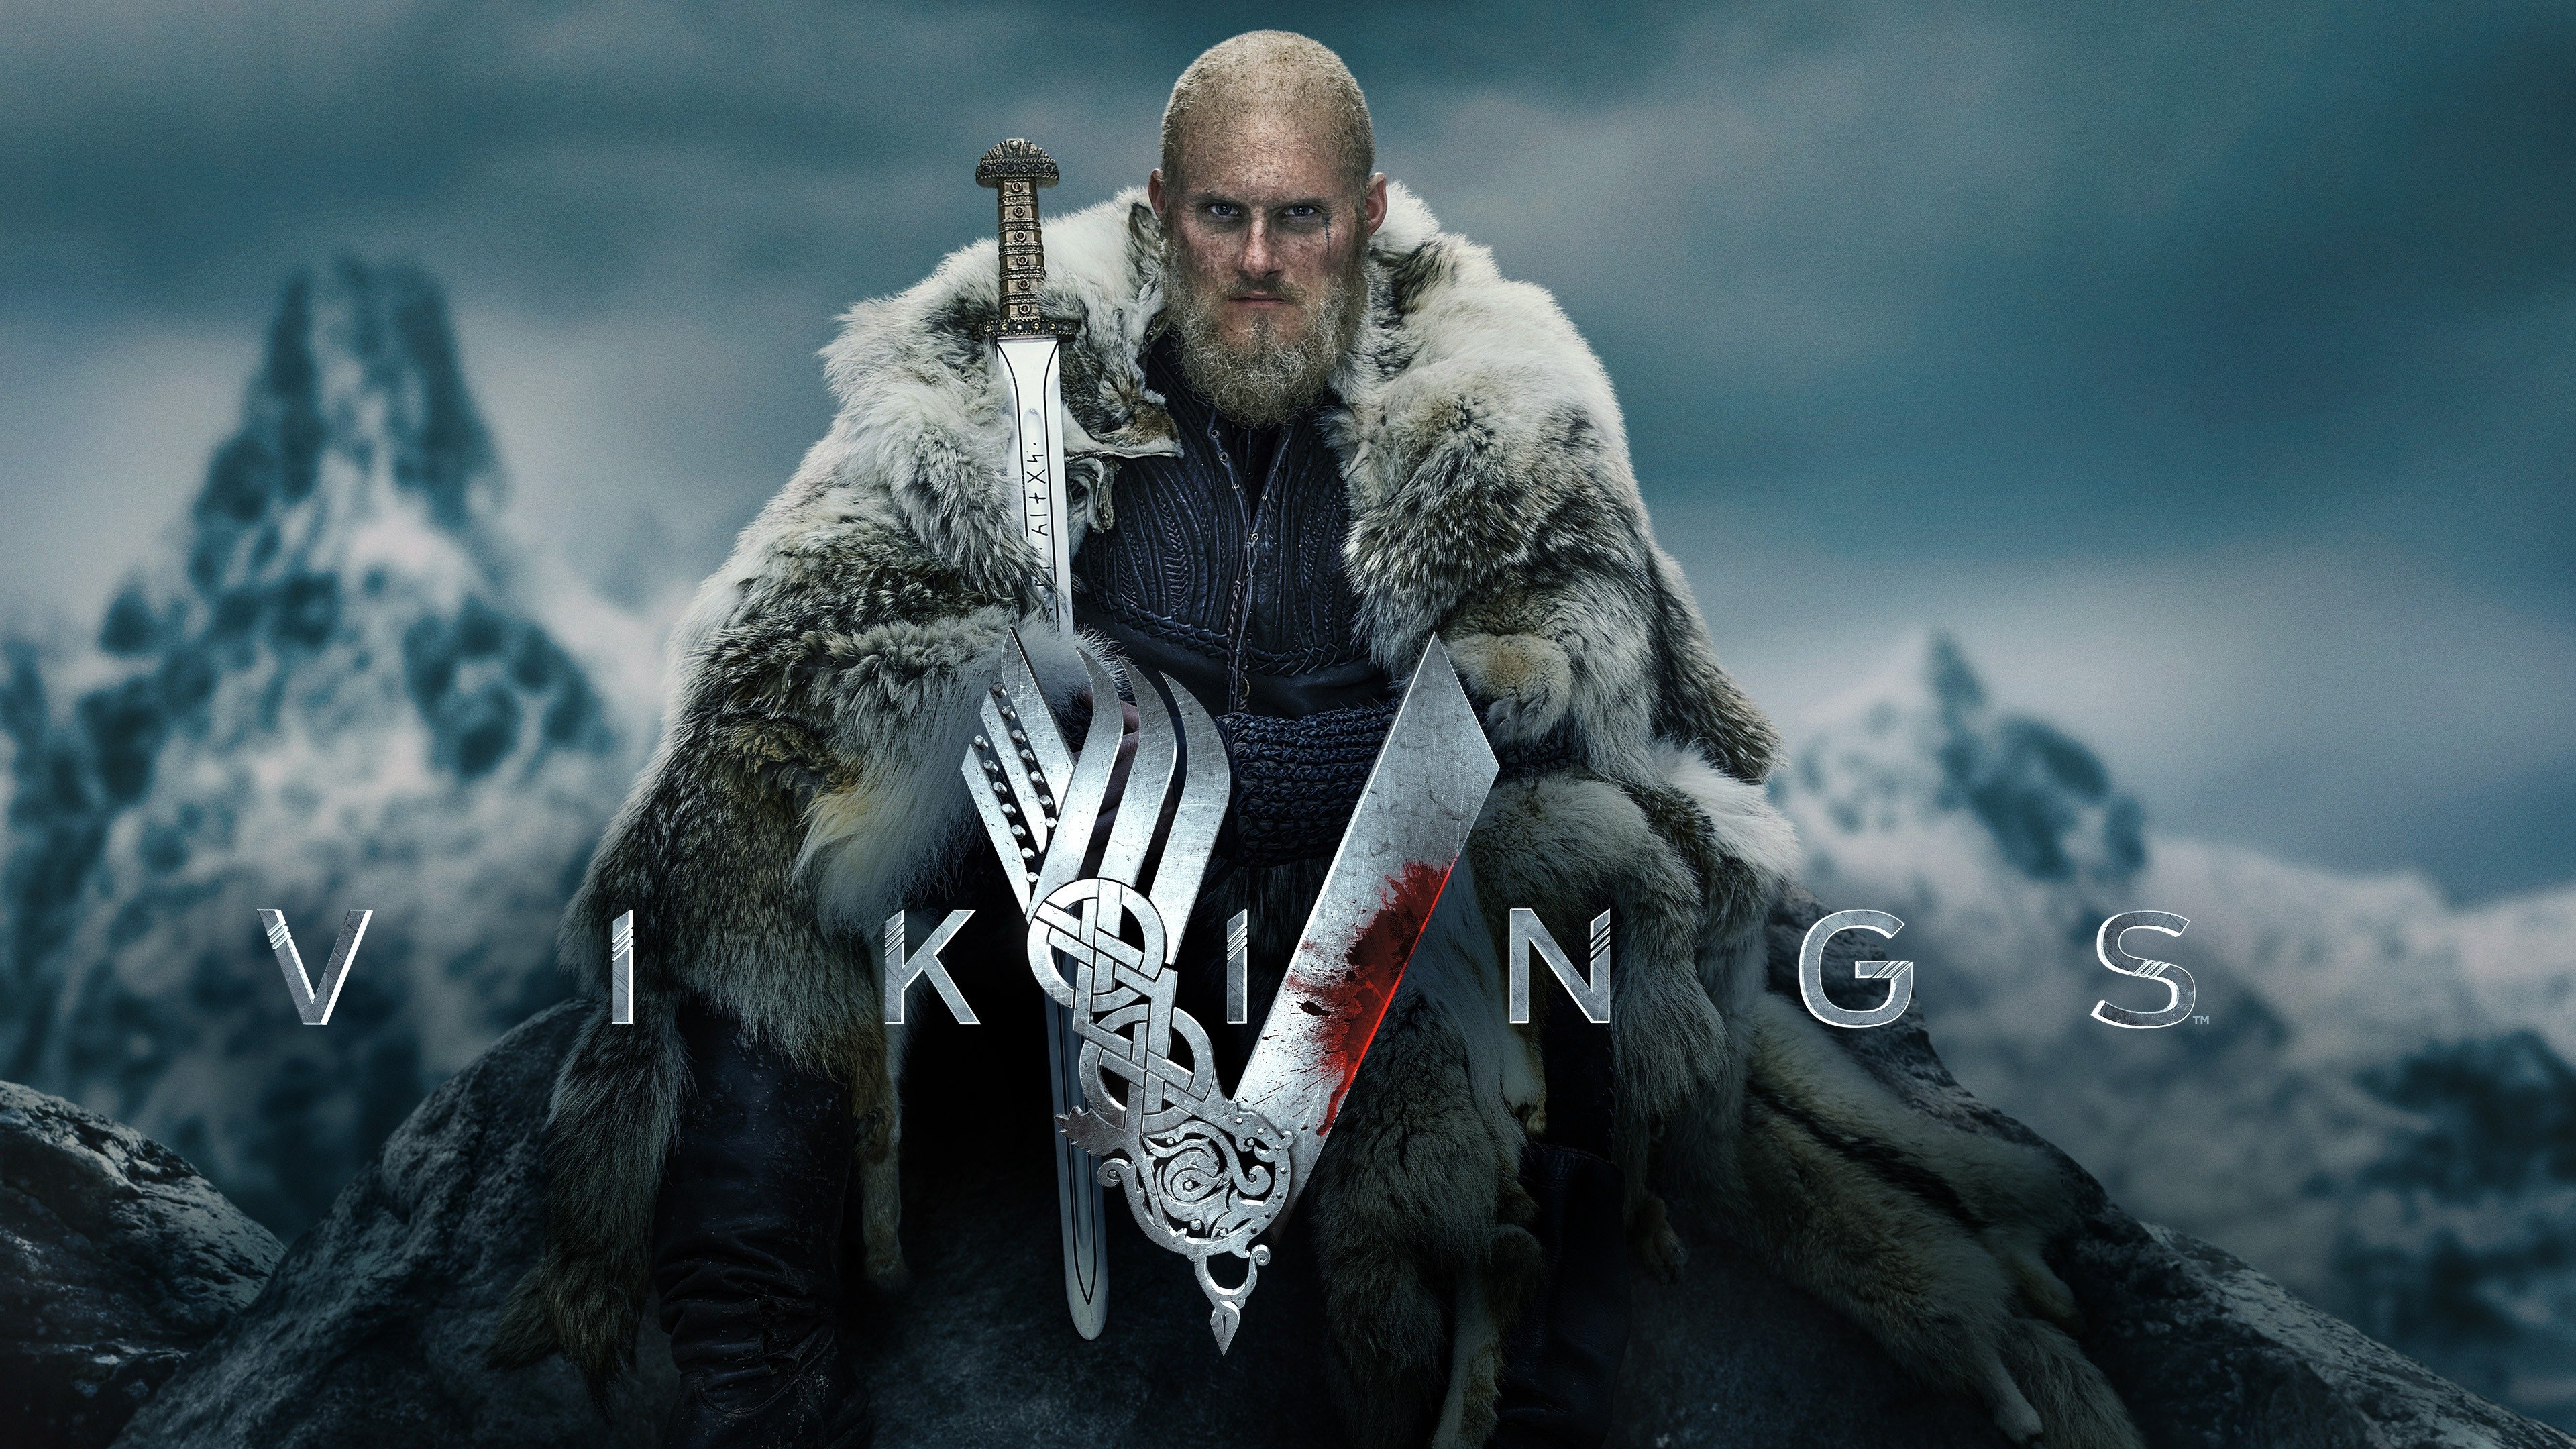 How to Watch Vikings: Valhalla: Where Is it Streaming?